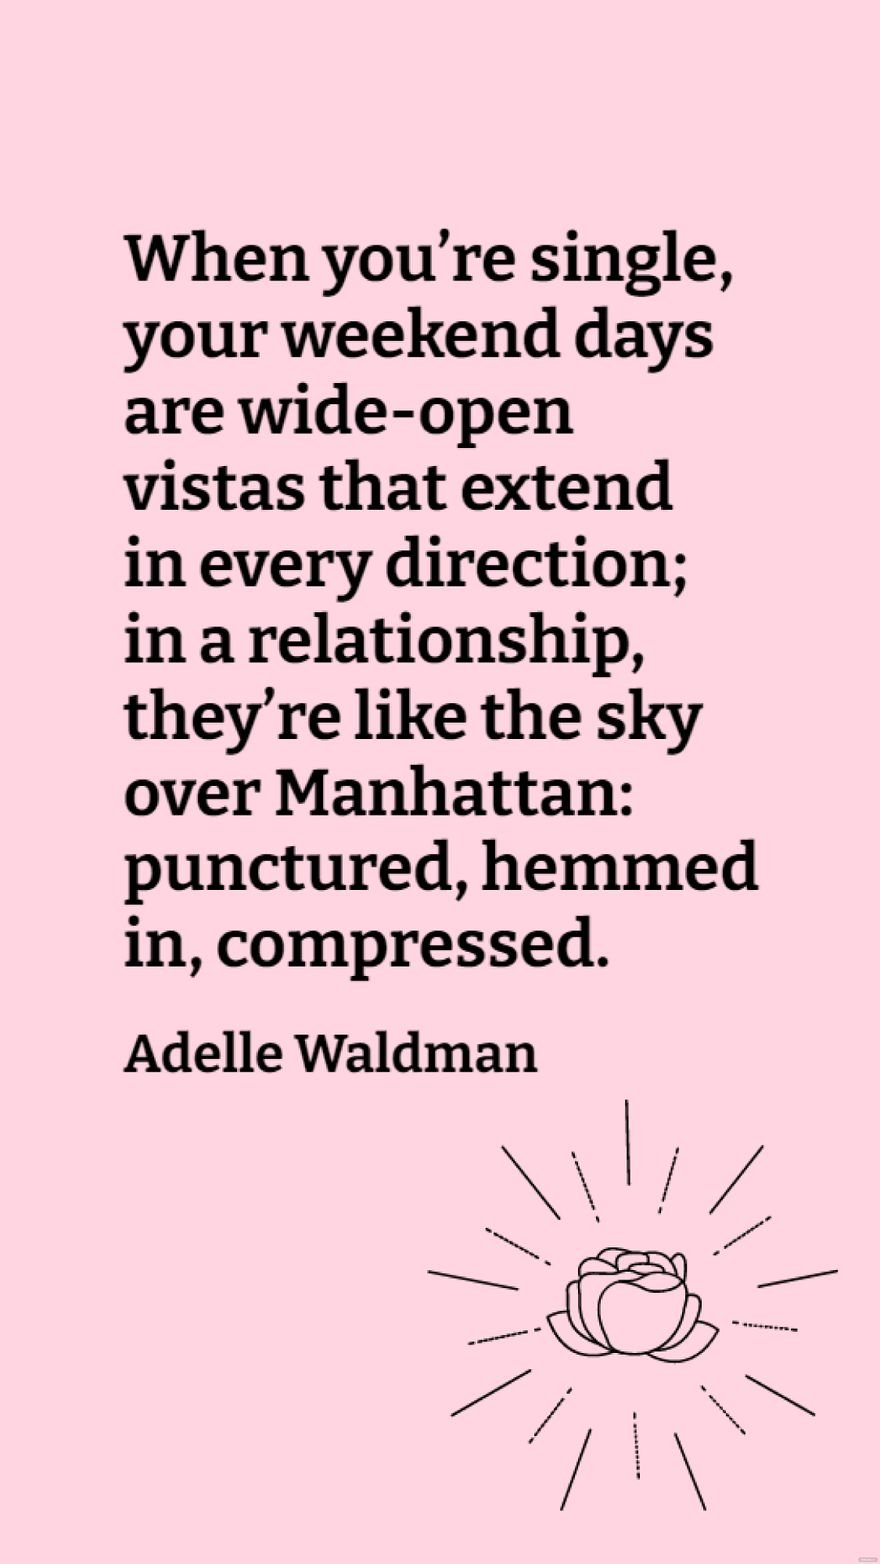 Free Adelle Waldman - When you’re single, your weekend days are wide-open vistas that extend in every direction; in a relationship, they’re like the sky over Manhattan: punctured, hemmed in, compressed.  in JPG